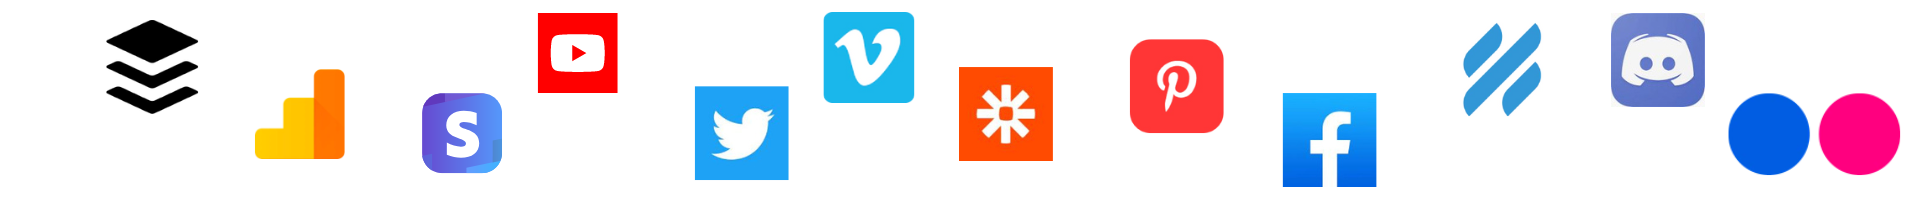 Icons showing various integrations: youtube, twitter, facebook, vimeo, google analytics, zapier, discord and more.